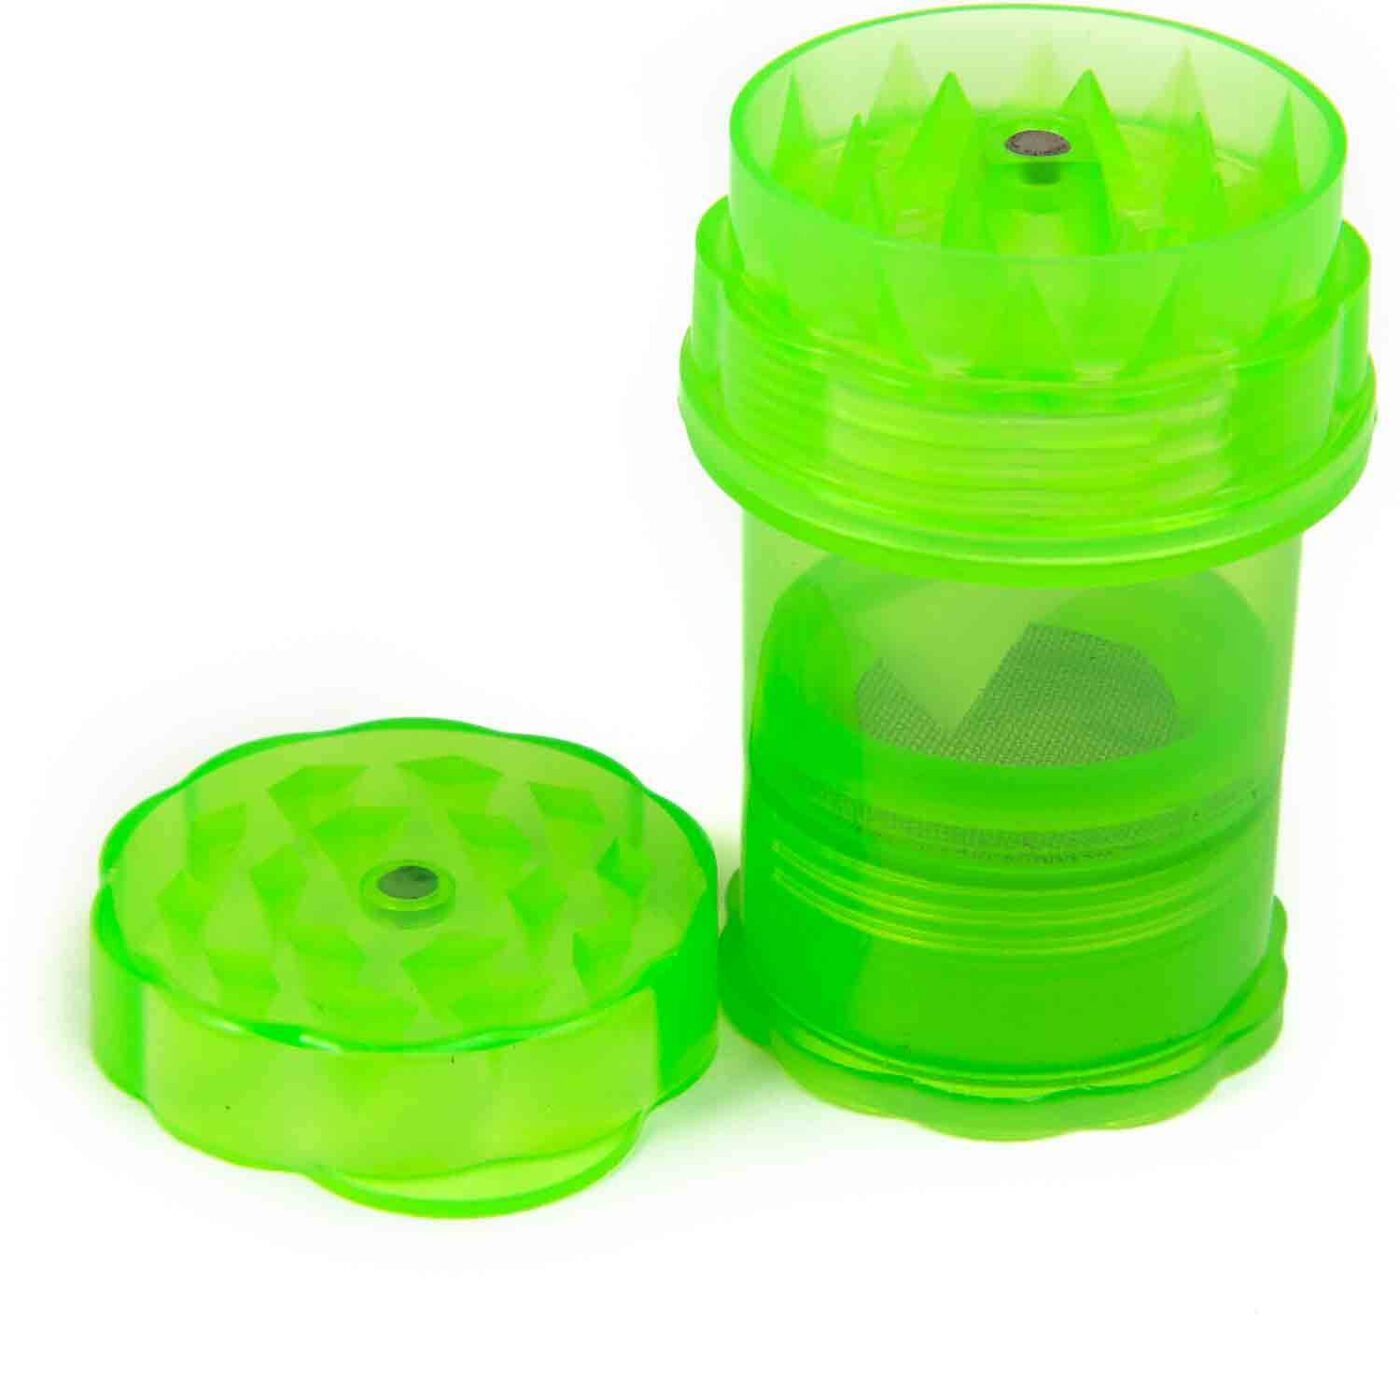 Large HerbSaver  4 Piece Herb Grinders at an Affordable Price